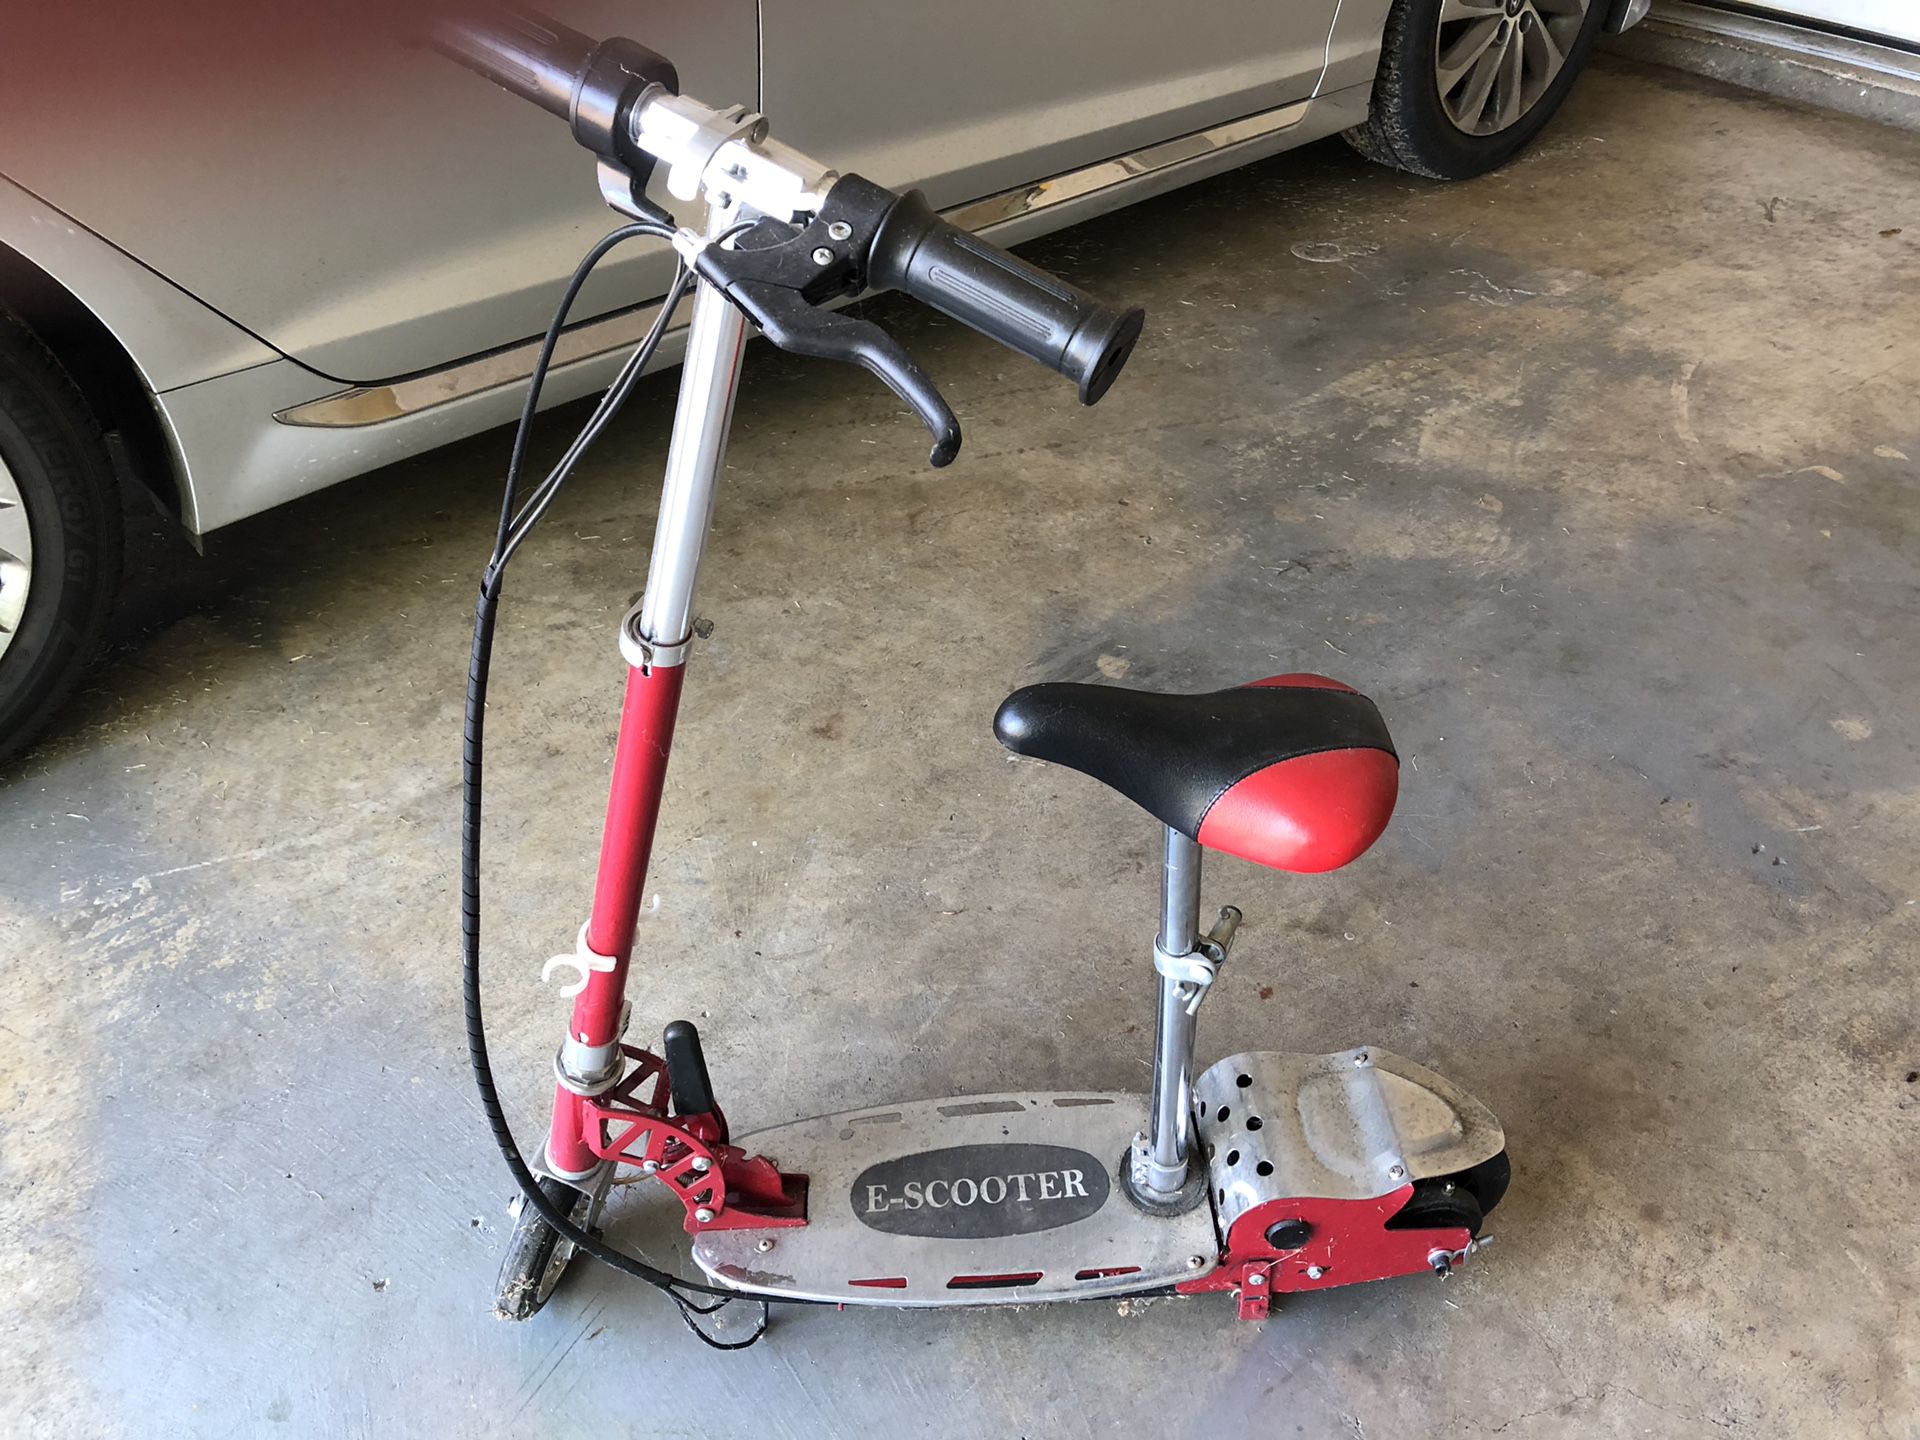 Childs electric scooter with brakes and adjustable seat. A bit dirty from sitting in the garage but has charger and works good.